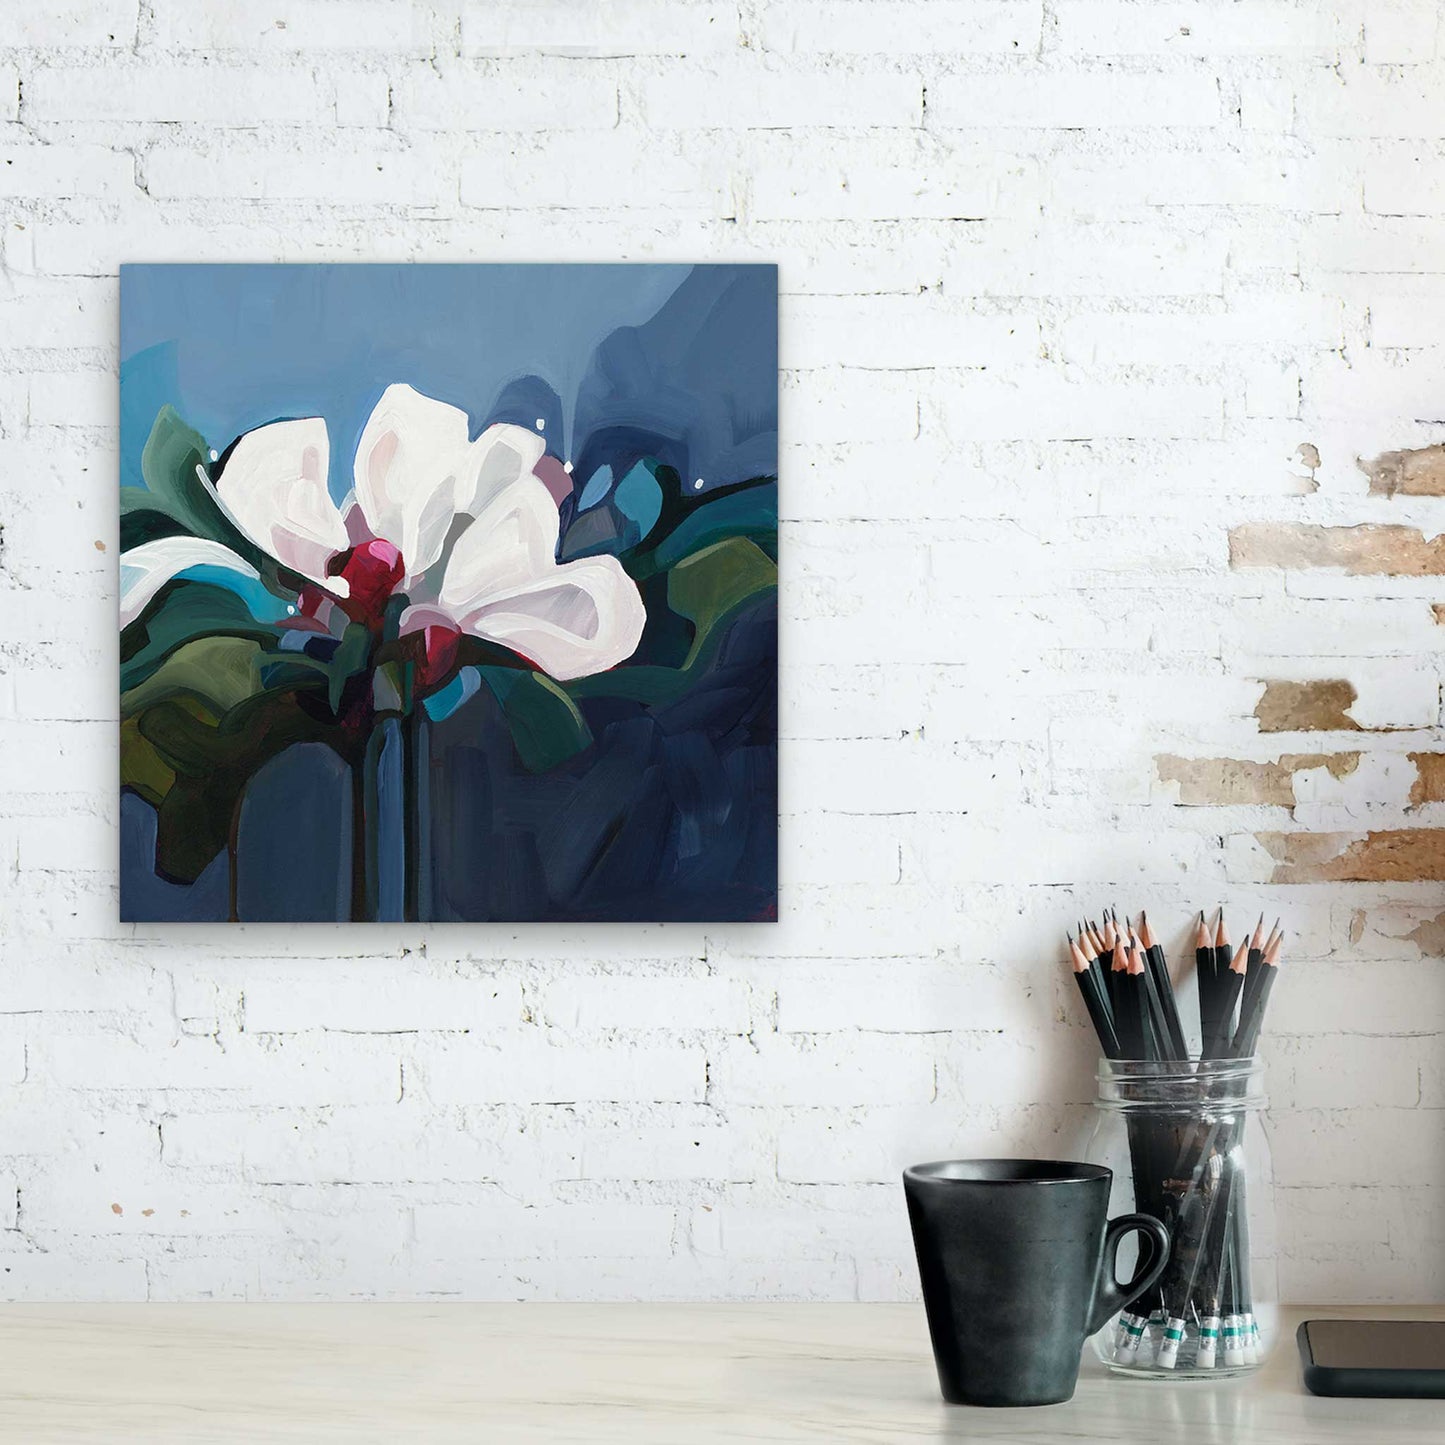 acrylic flower painting canvas floral art abstract flower by Caadian artist Susannah Bleasby